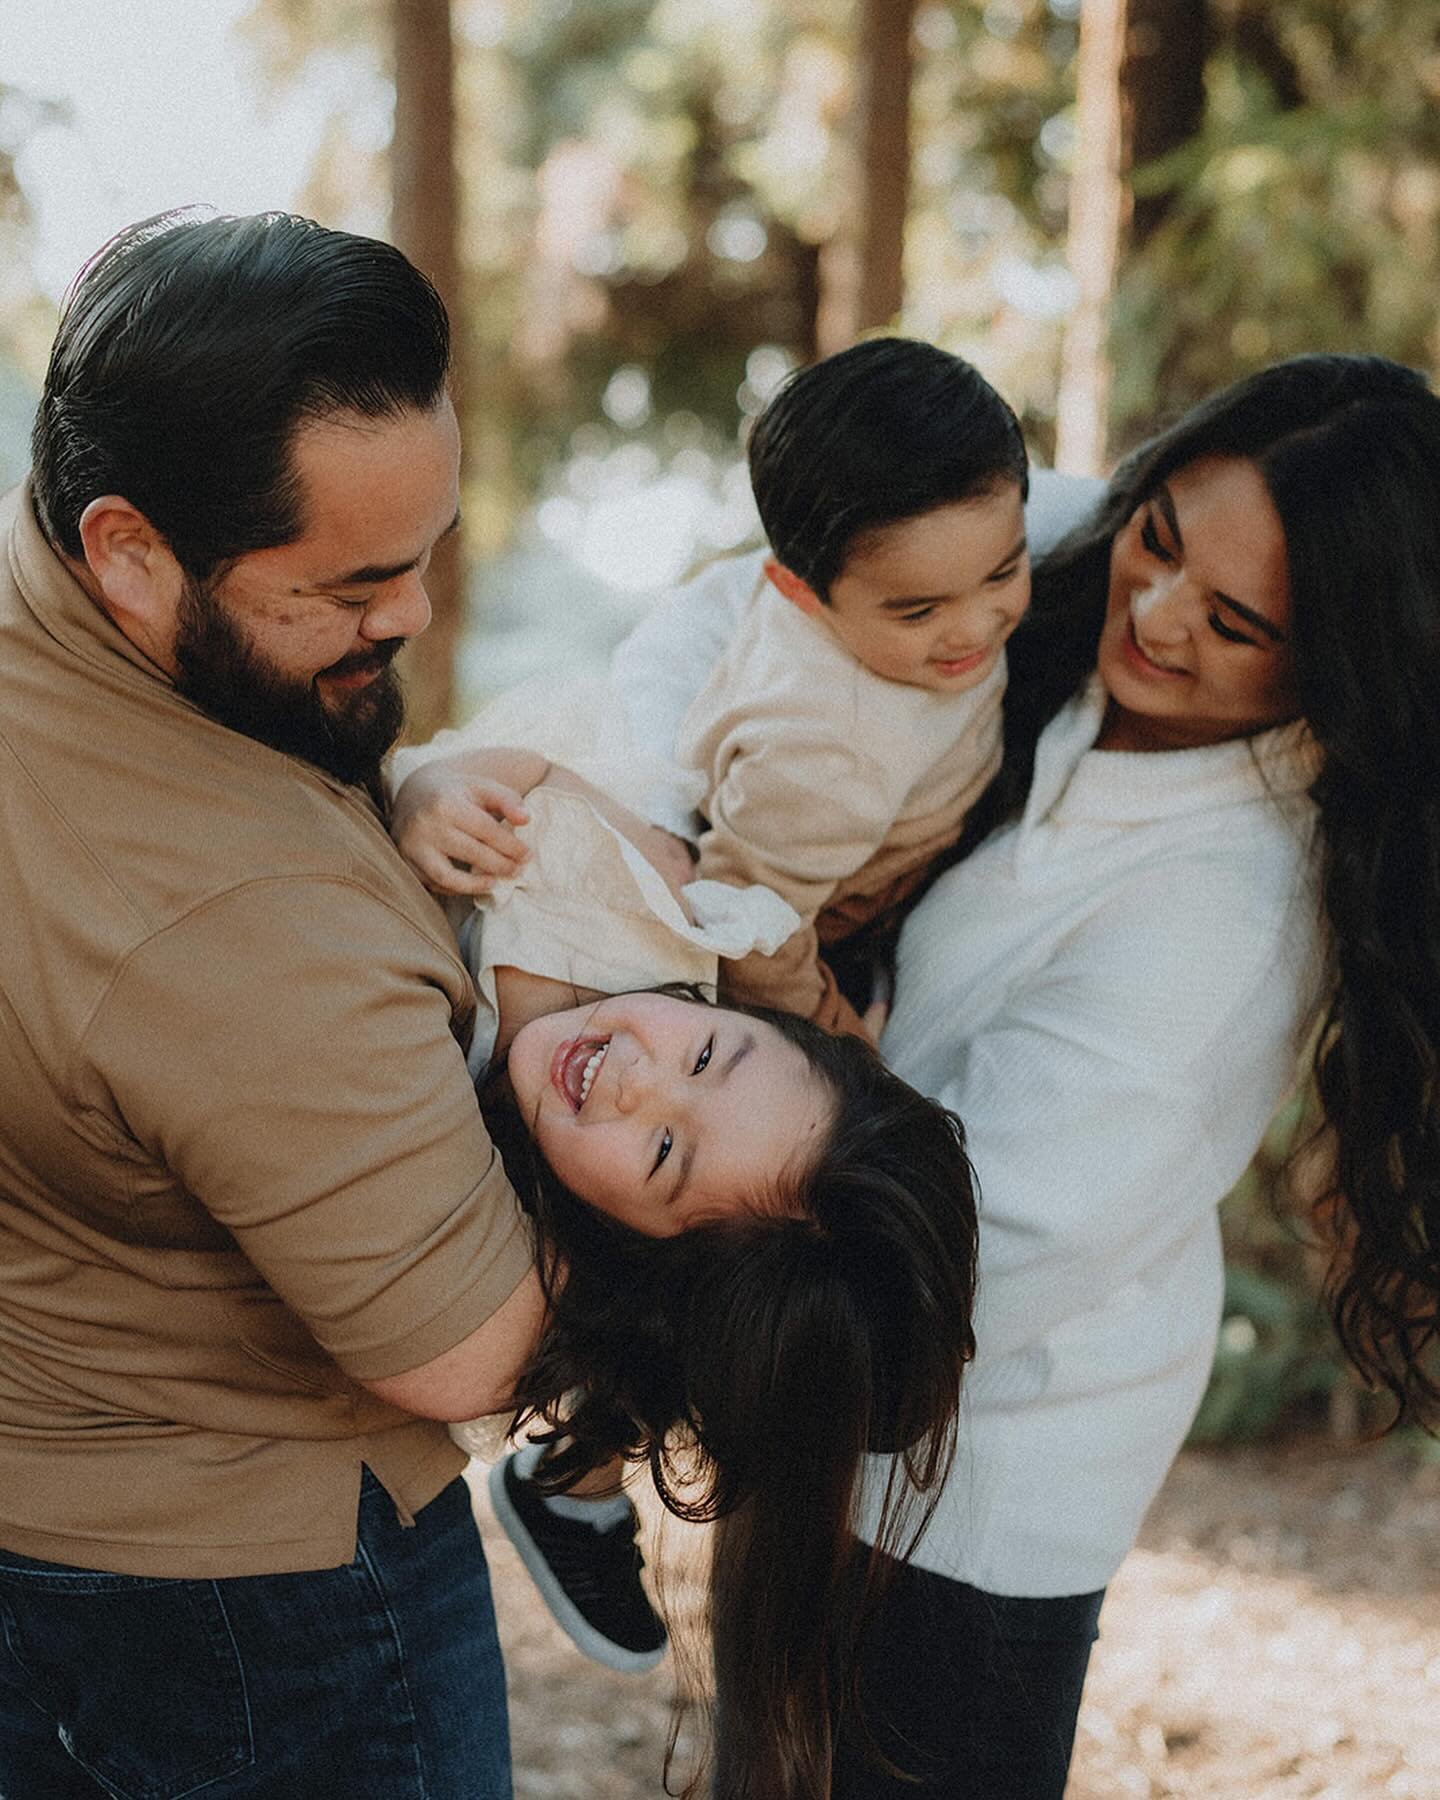 There&rsquo;s nothing quite like a fun family session spent running around the forest and being silly together. Remember, your family session isn&rsquo;t about having that *perfect* photo&mdash;-it&rsquo;s about capturing the personalities of your li